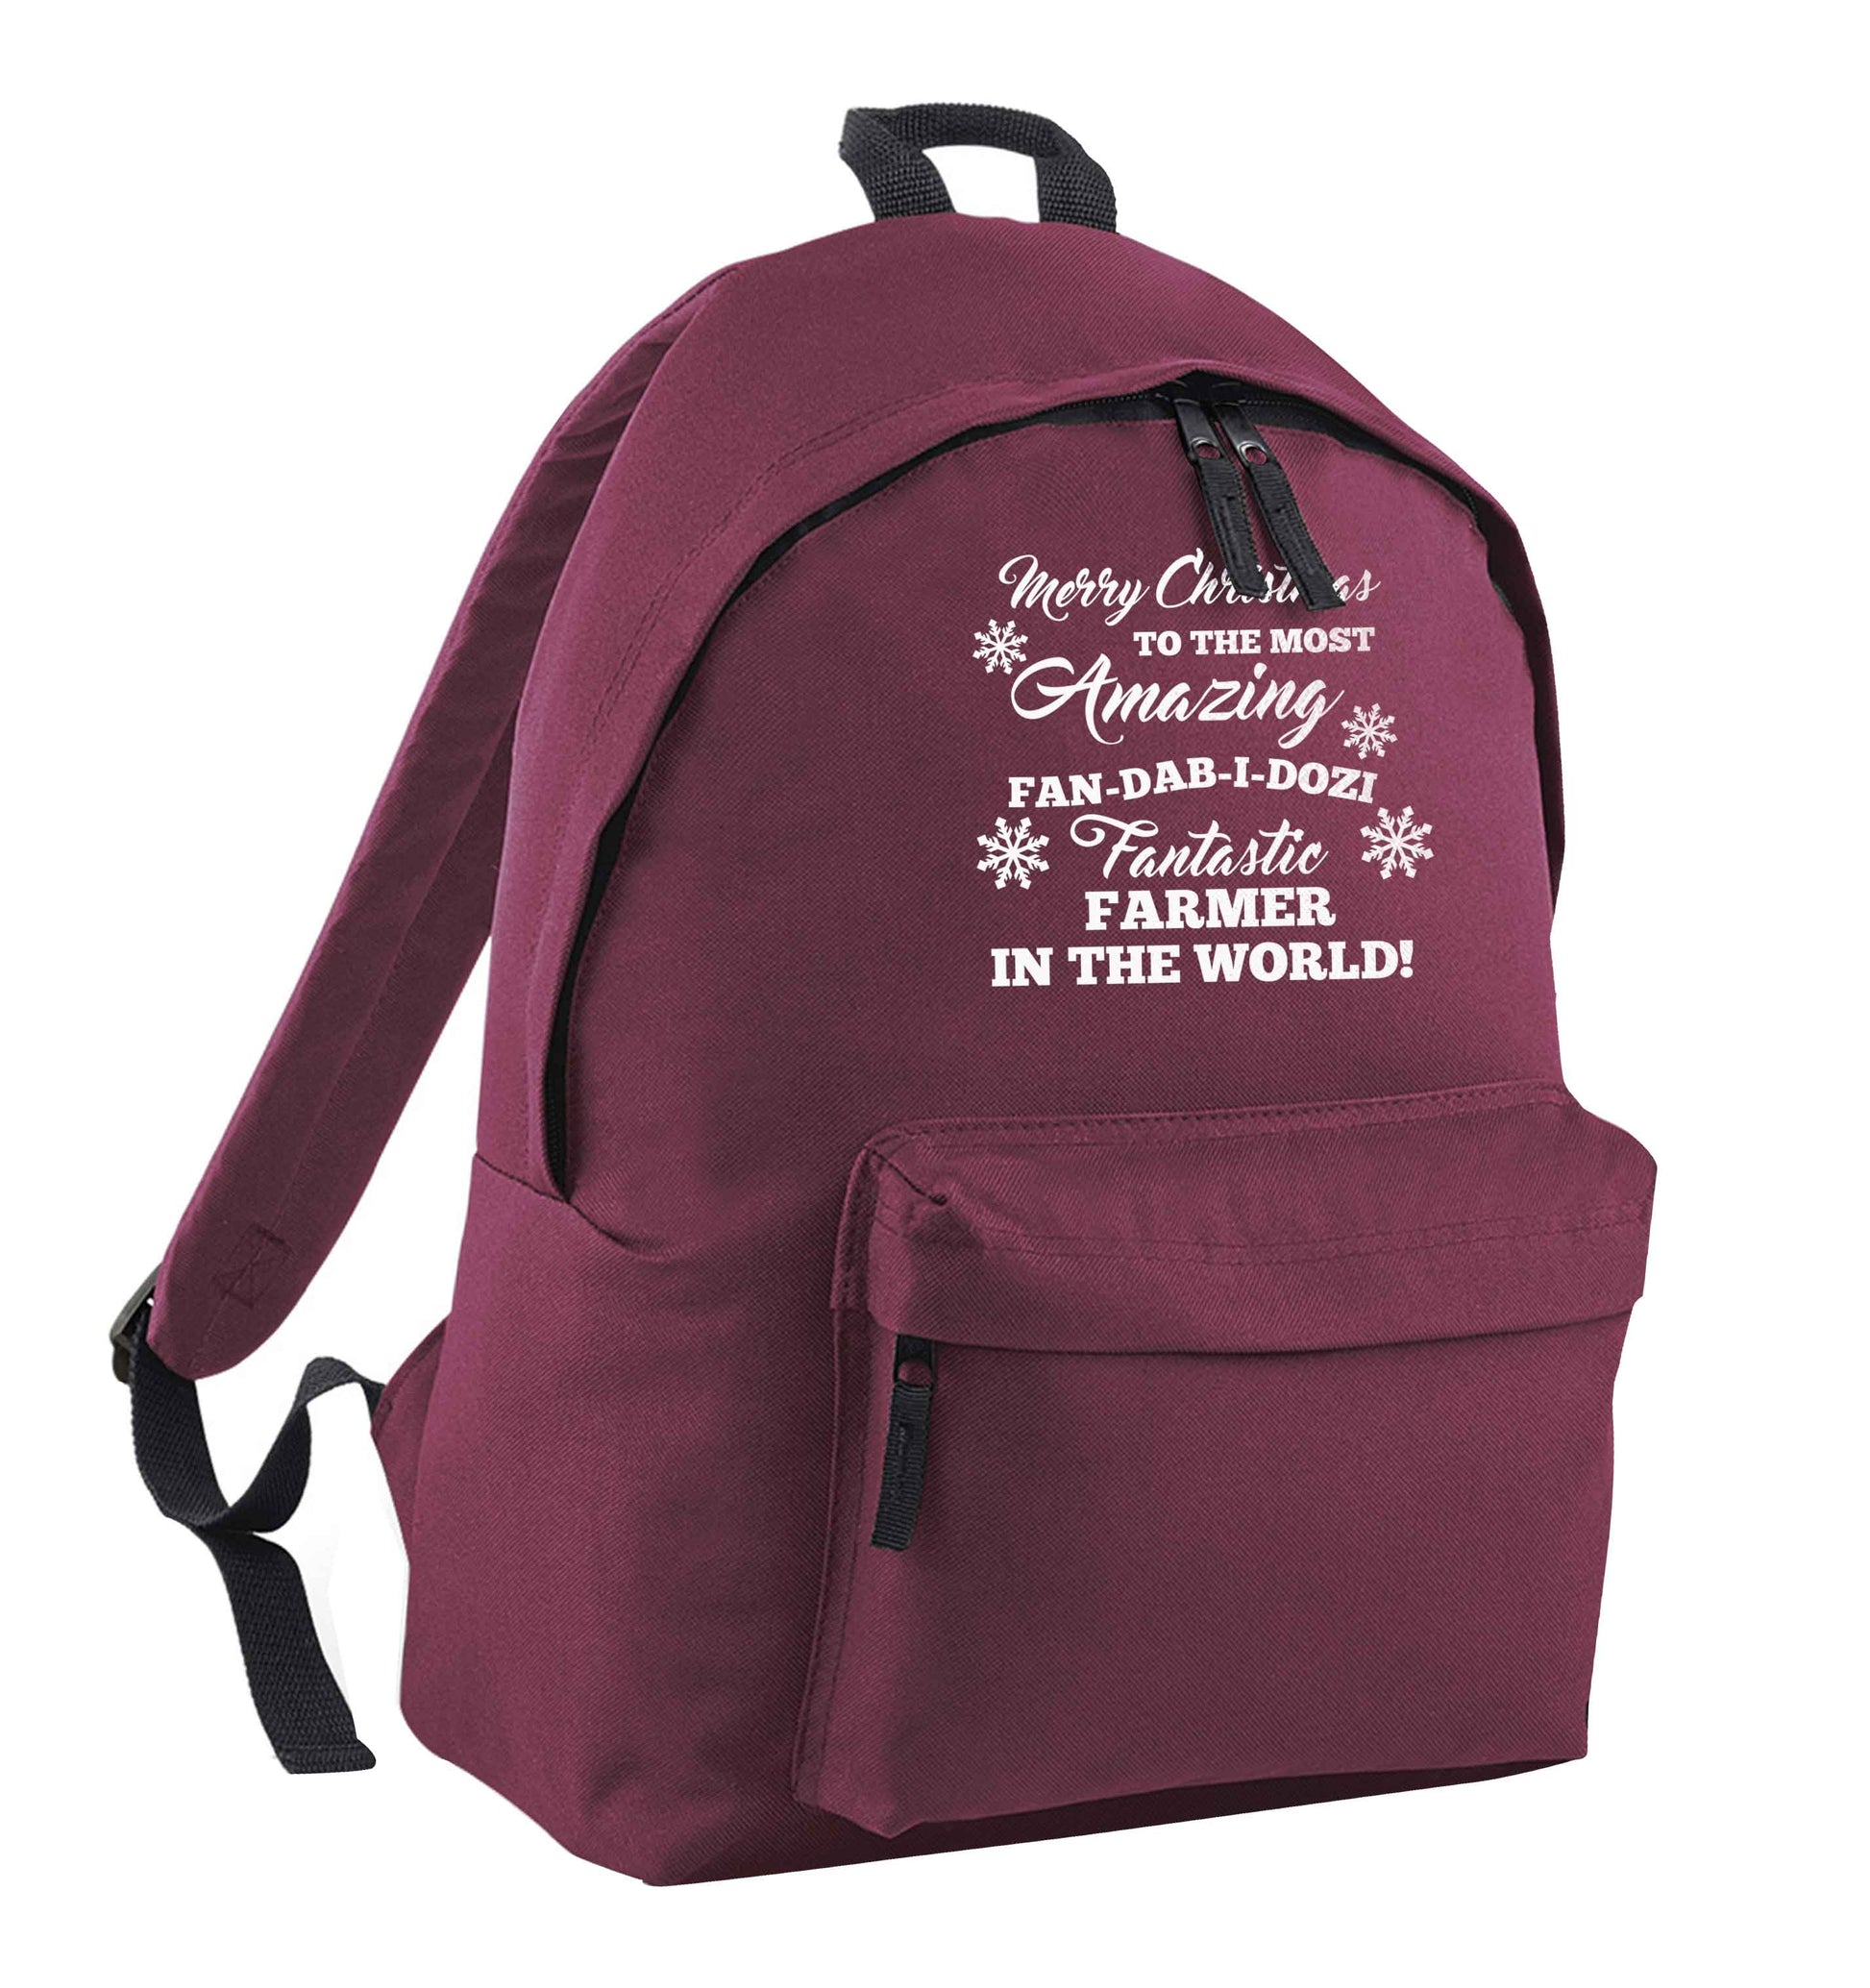 Merry Christmas to the most amazing farmer in the world! maroon adults backpack